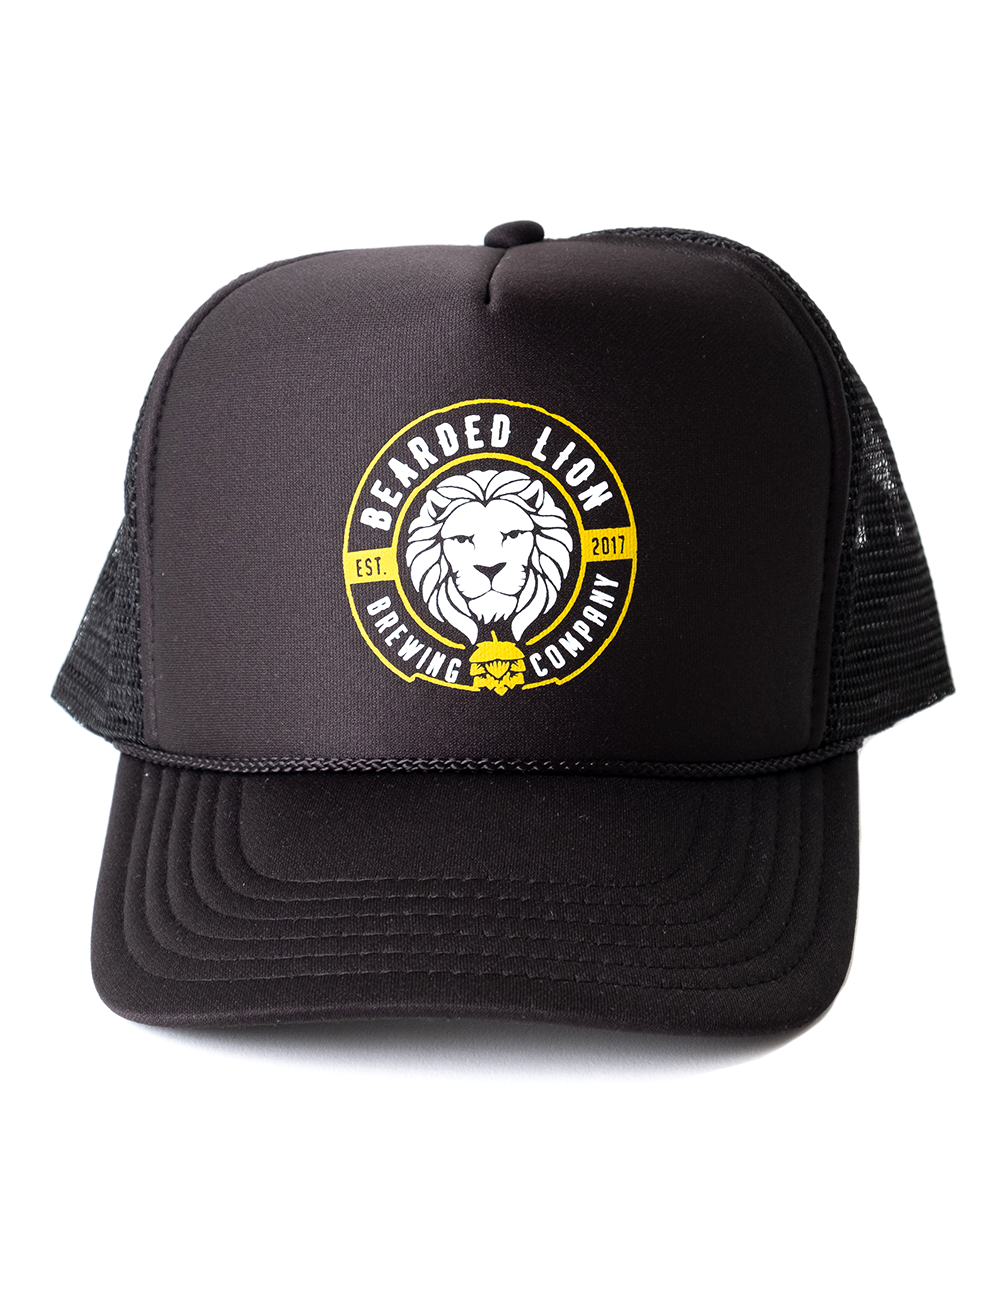 Art and ink bearded lion branded cap